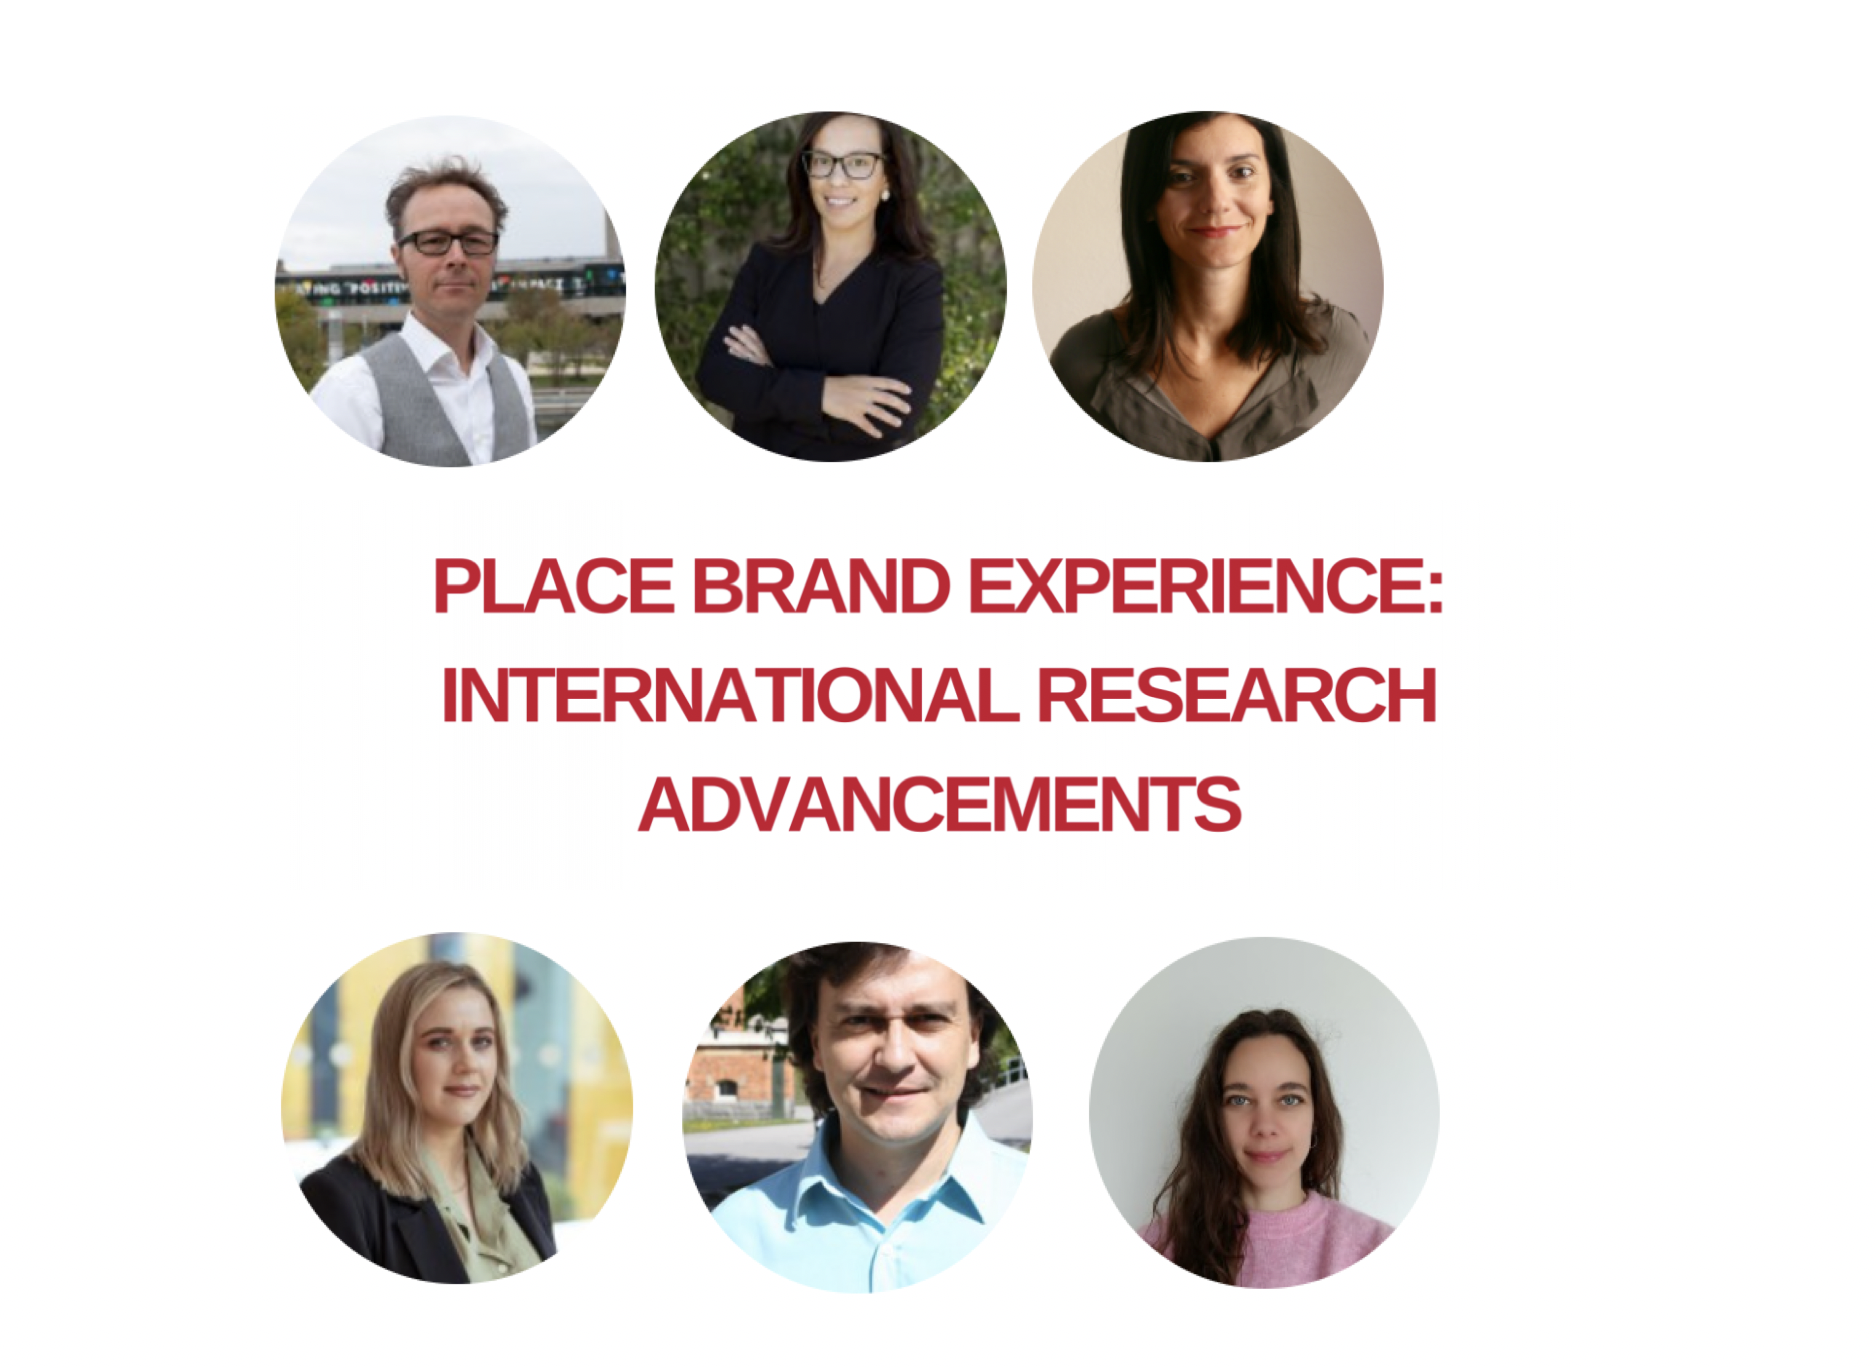 CAS Workshop on Place Brand Experience: International Research Advancements